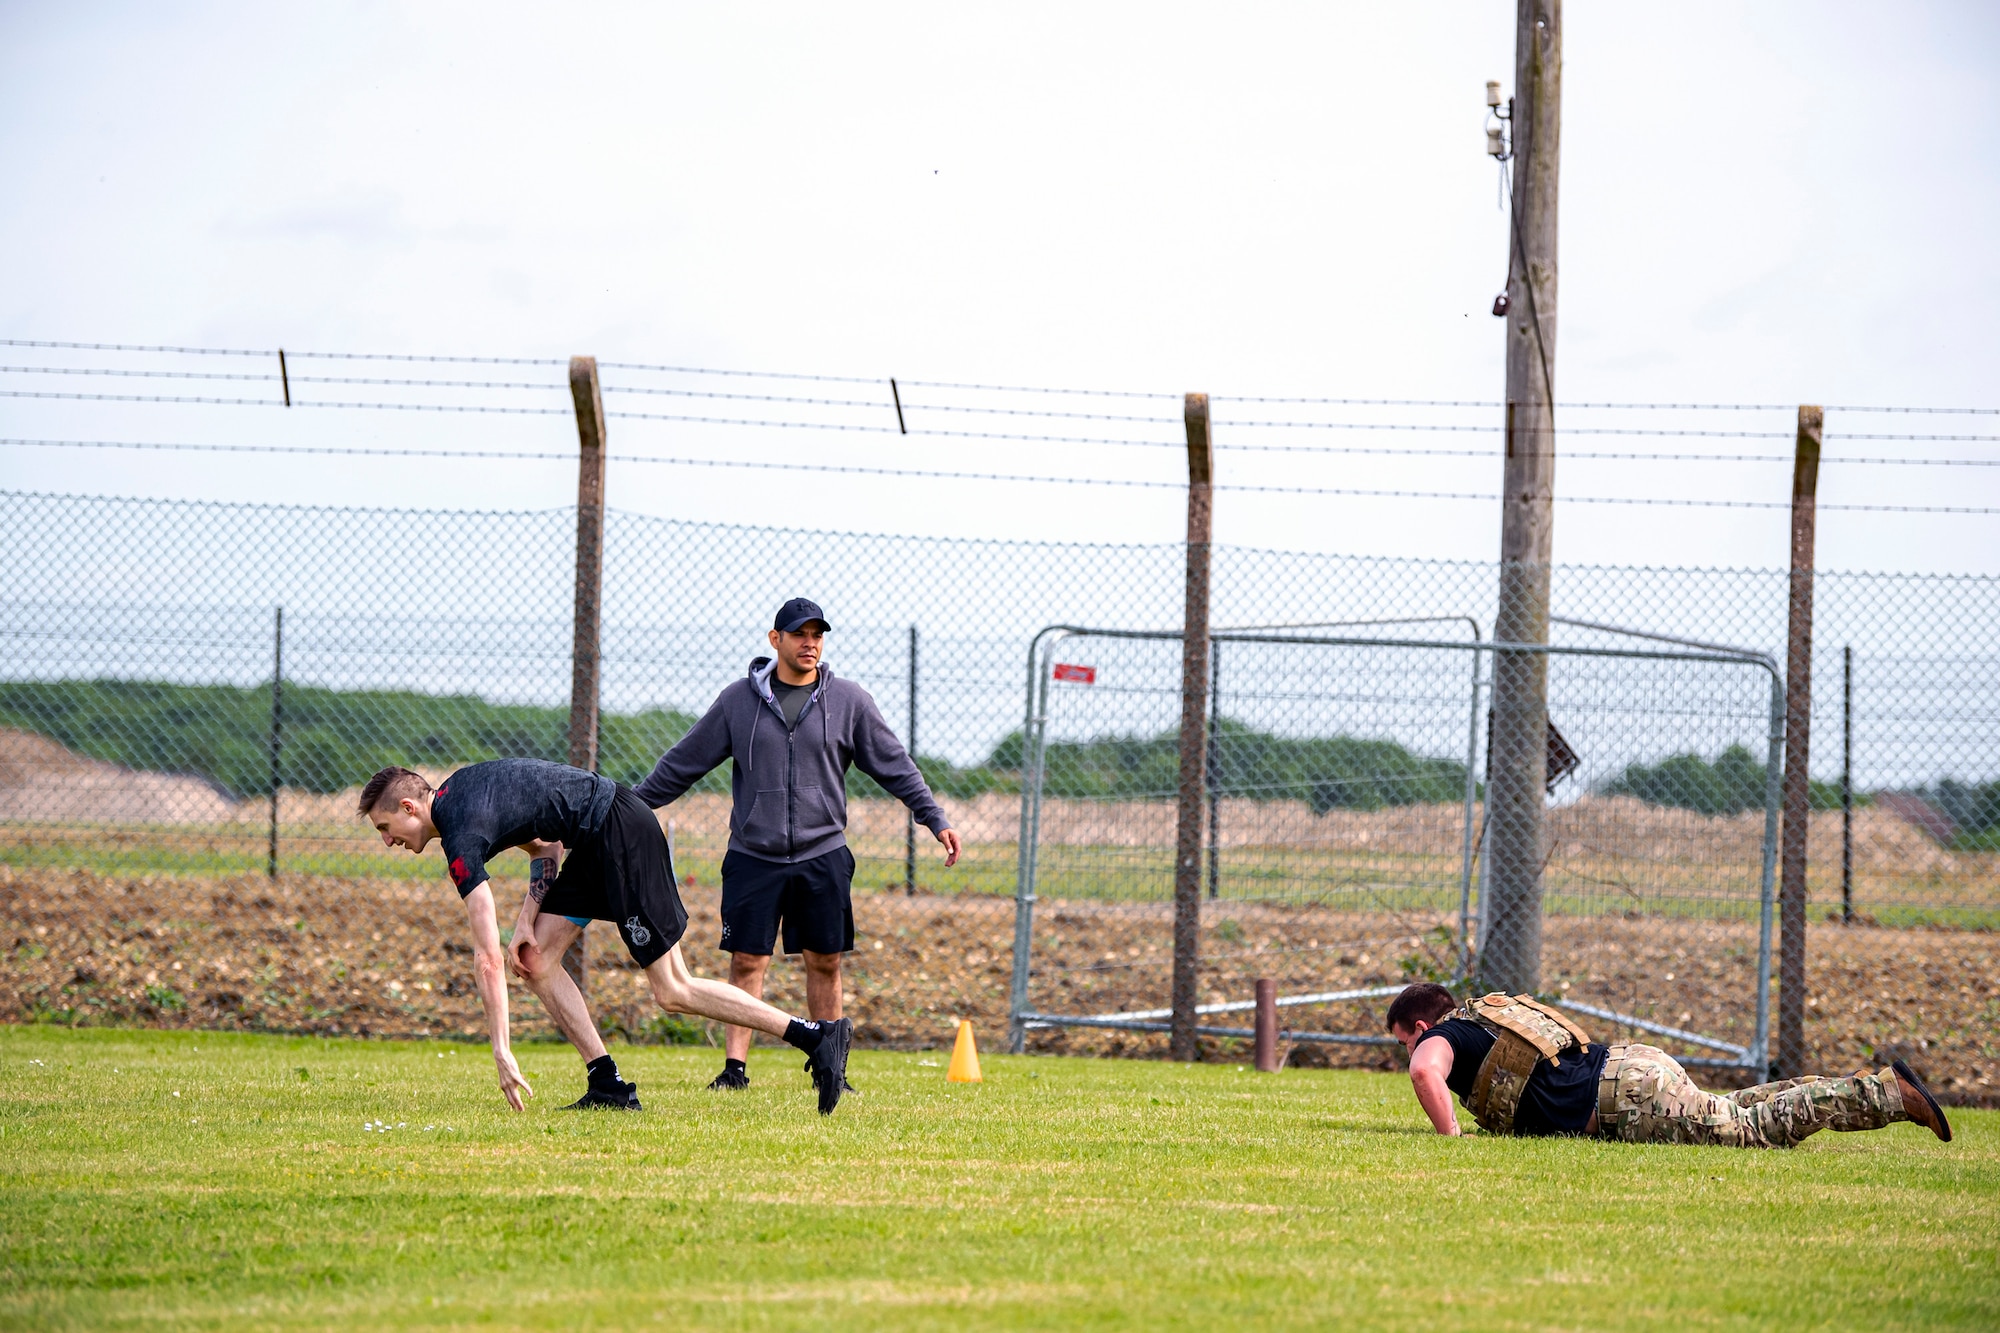 Airmen from the 423d Security Forces Squadron complete a defender challenge at RAF Alconbury, May 18, 2022. Airmen, civilians and local law enforcement participated in the challenge, held in honor of National Police Week, to pay homage to those who gave their lives in the line of duty. (U.S. Air Force photo by Staff Sgt. Eugene Oliver)